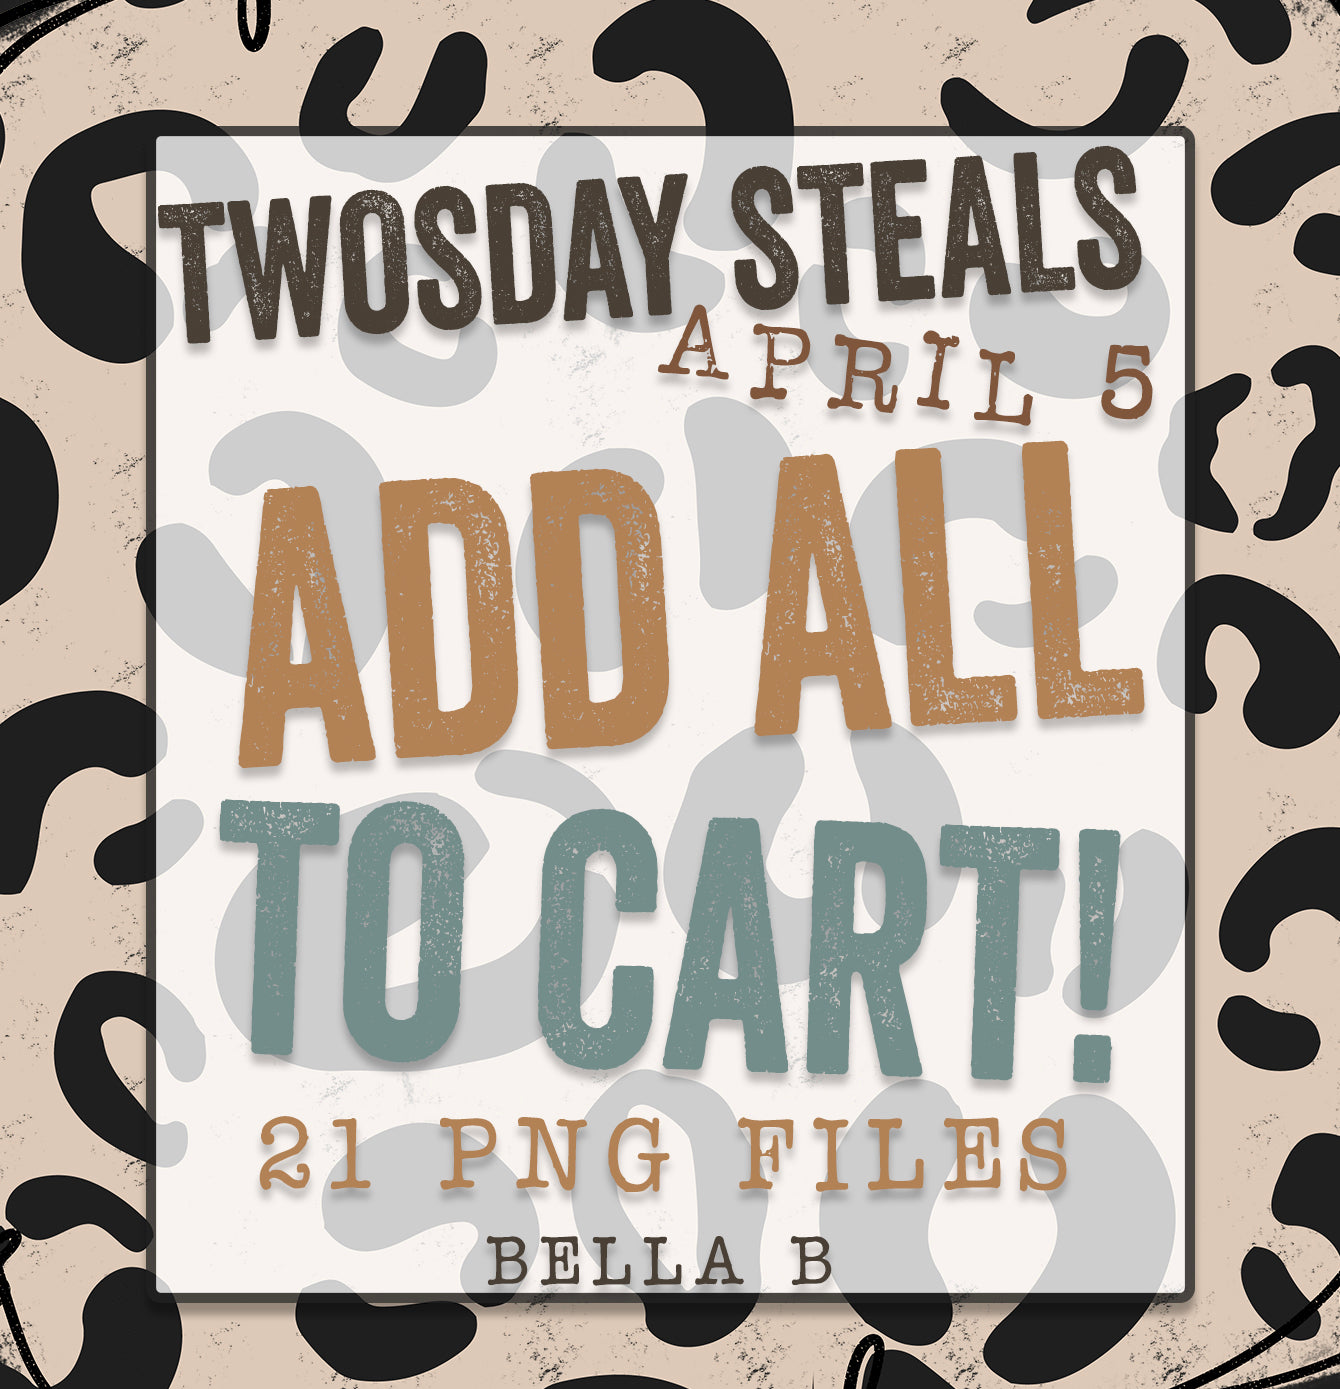 TWOSDAY STEALS April 5 - Add ALL To Cart